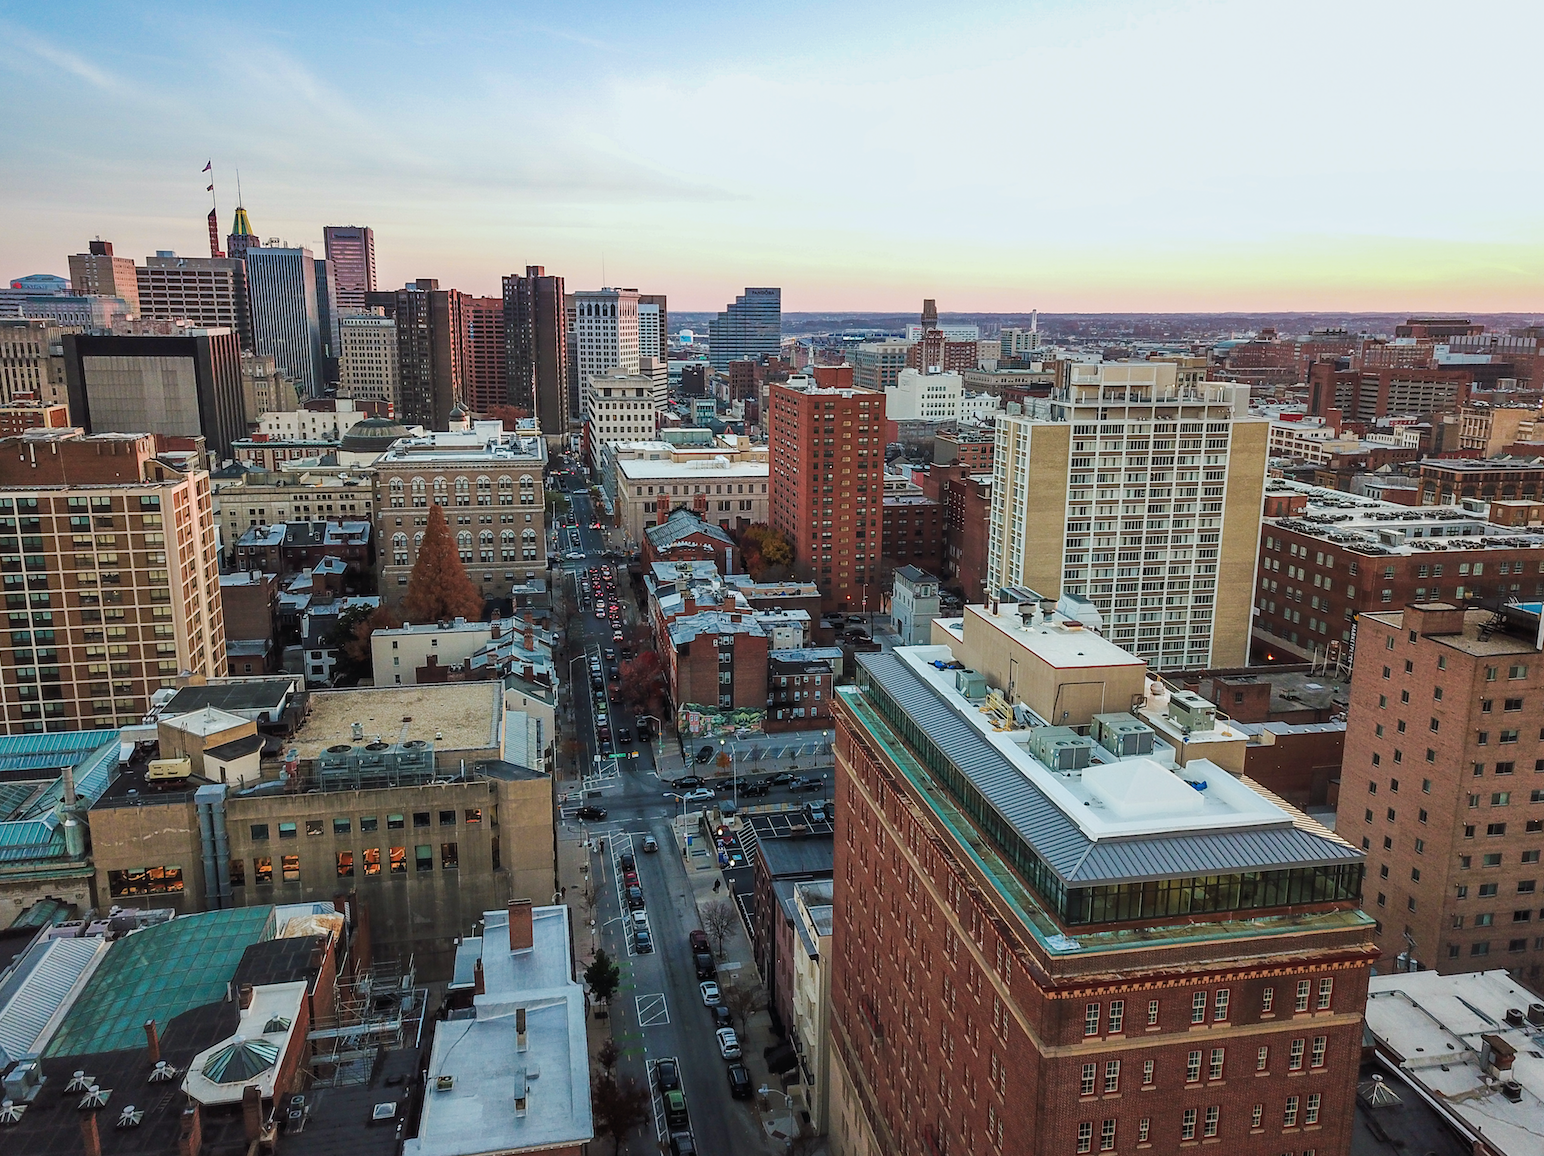 Aerial of Downtown Baltimore, Maryland from Mount Vernon Place. Image by Christian Hinkle / Shutterstock. United States, undated.